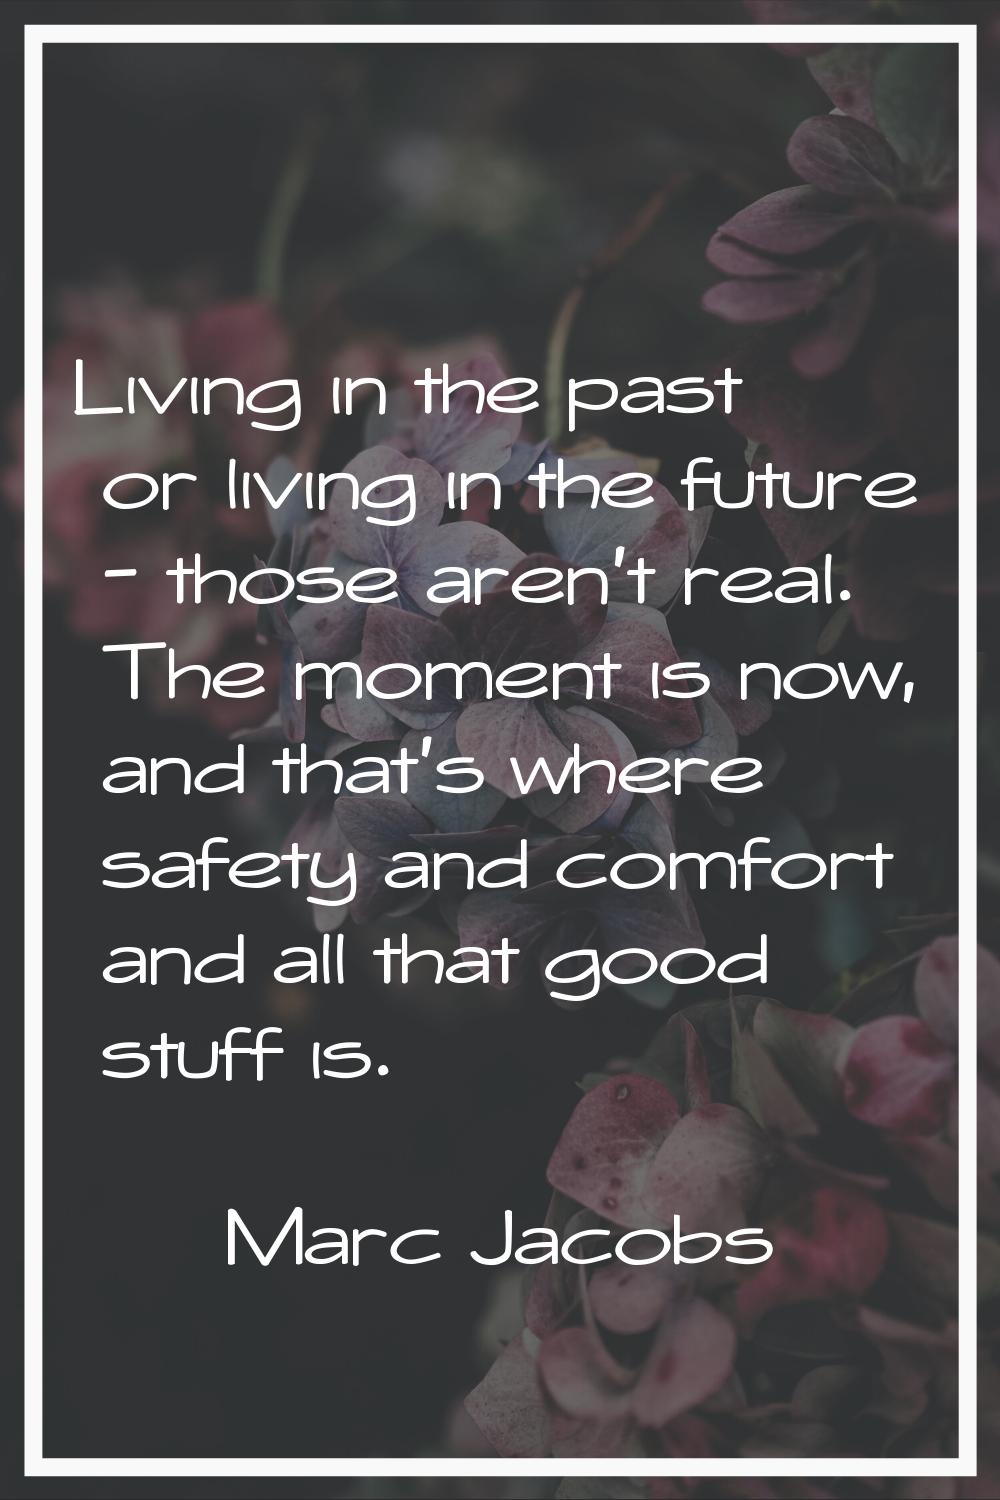 Living in the past or living in the future - those aren't real. The moment is now, and that's where